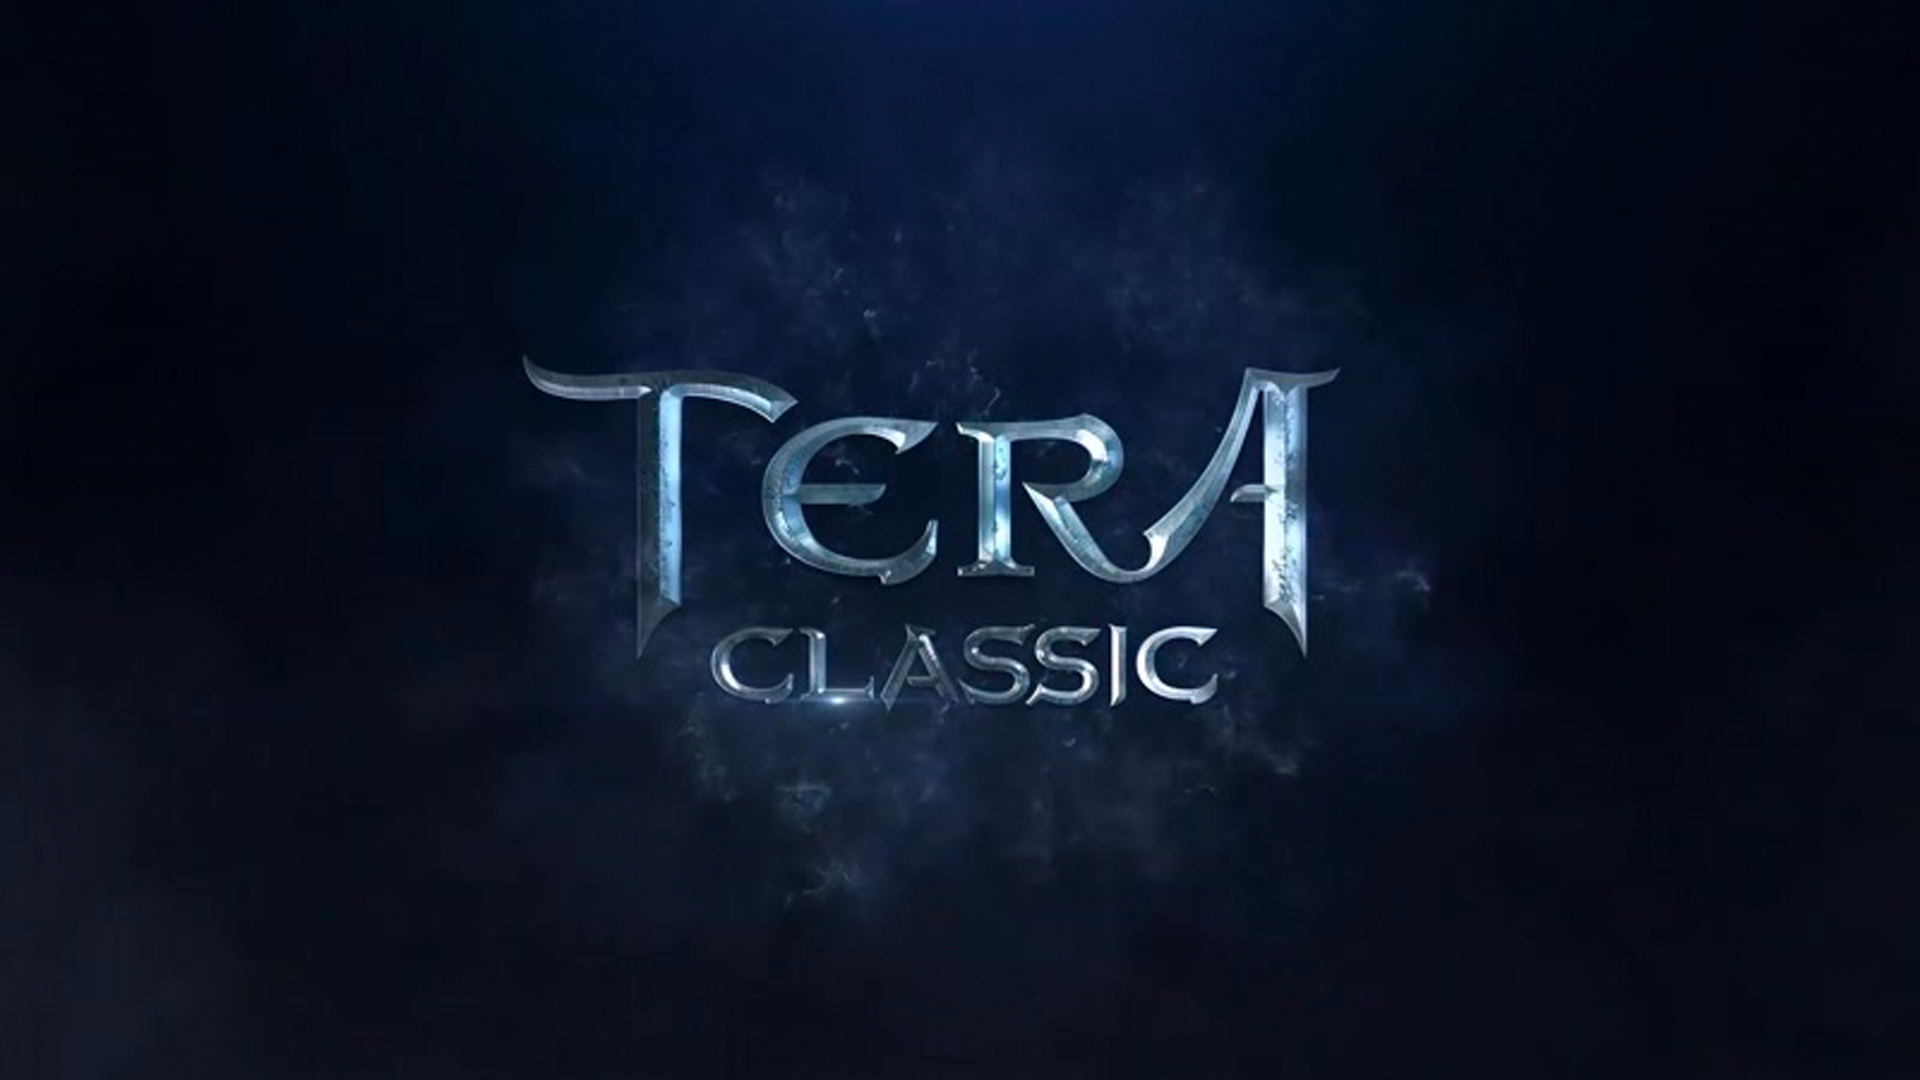 Banner of TERA CLASSIC 1.5.0